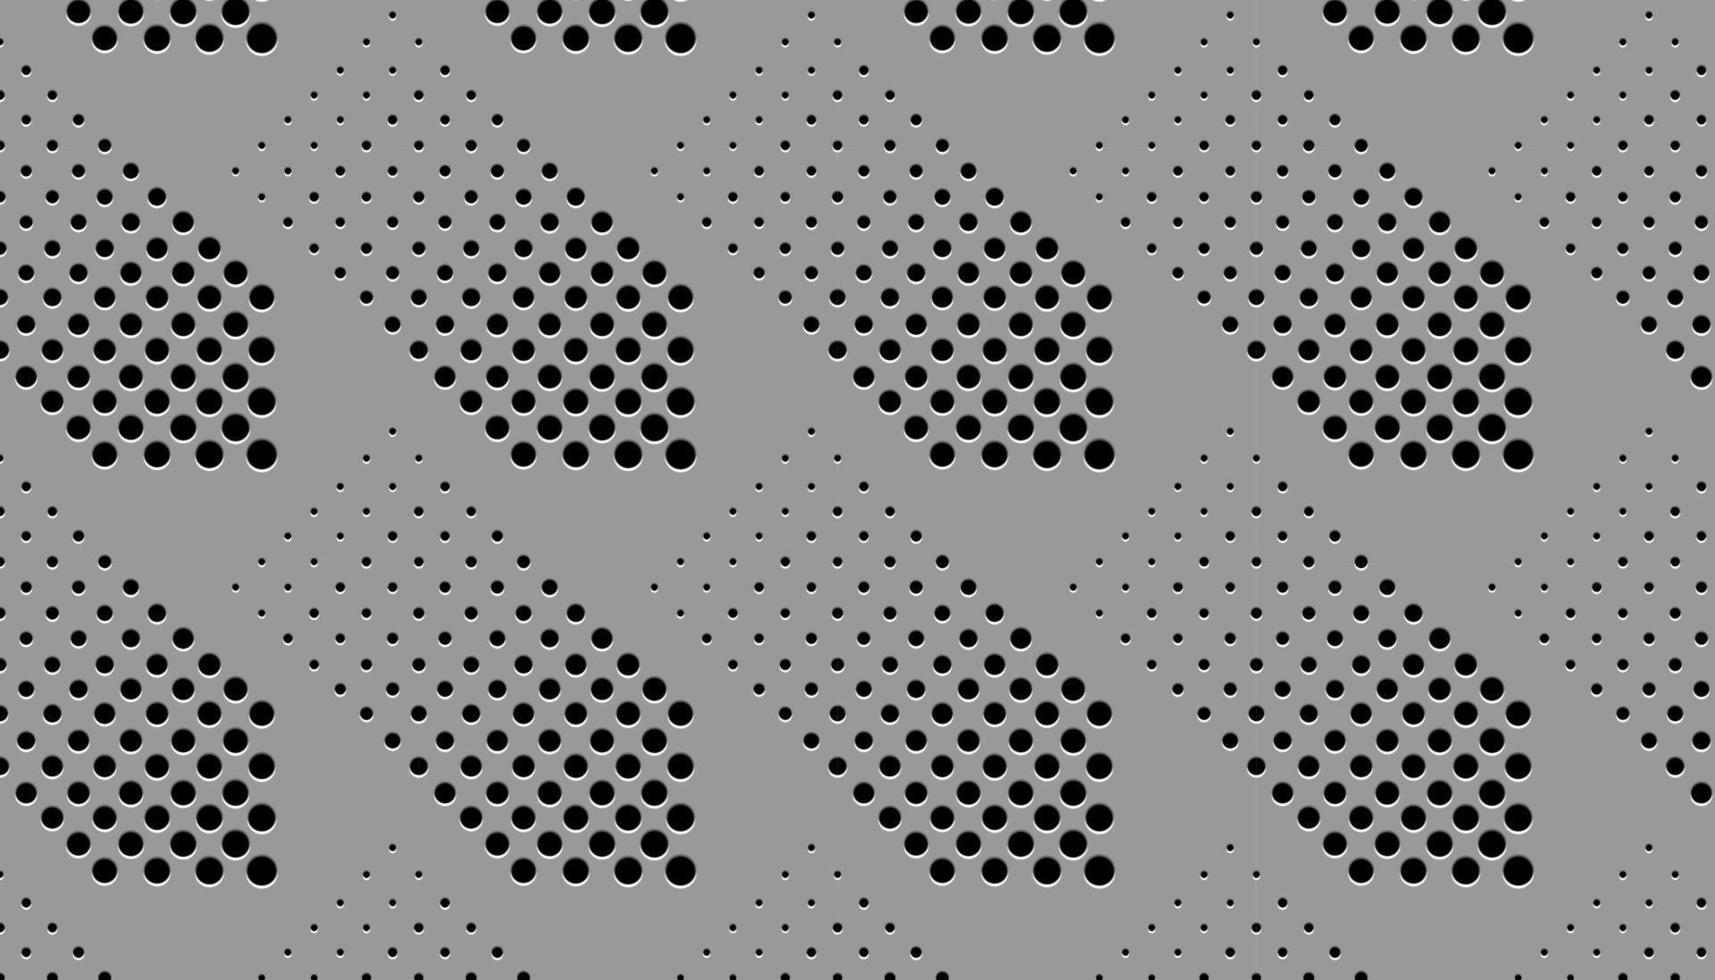 Metal  perforated pattern texture mesh background. vector